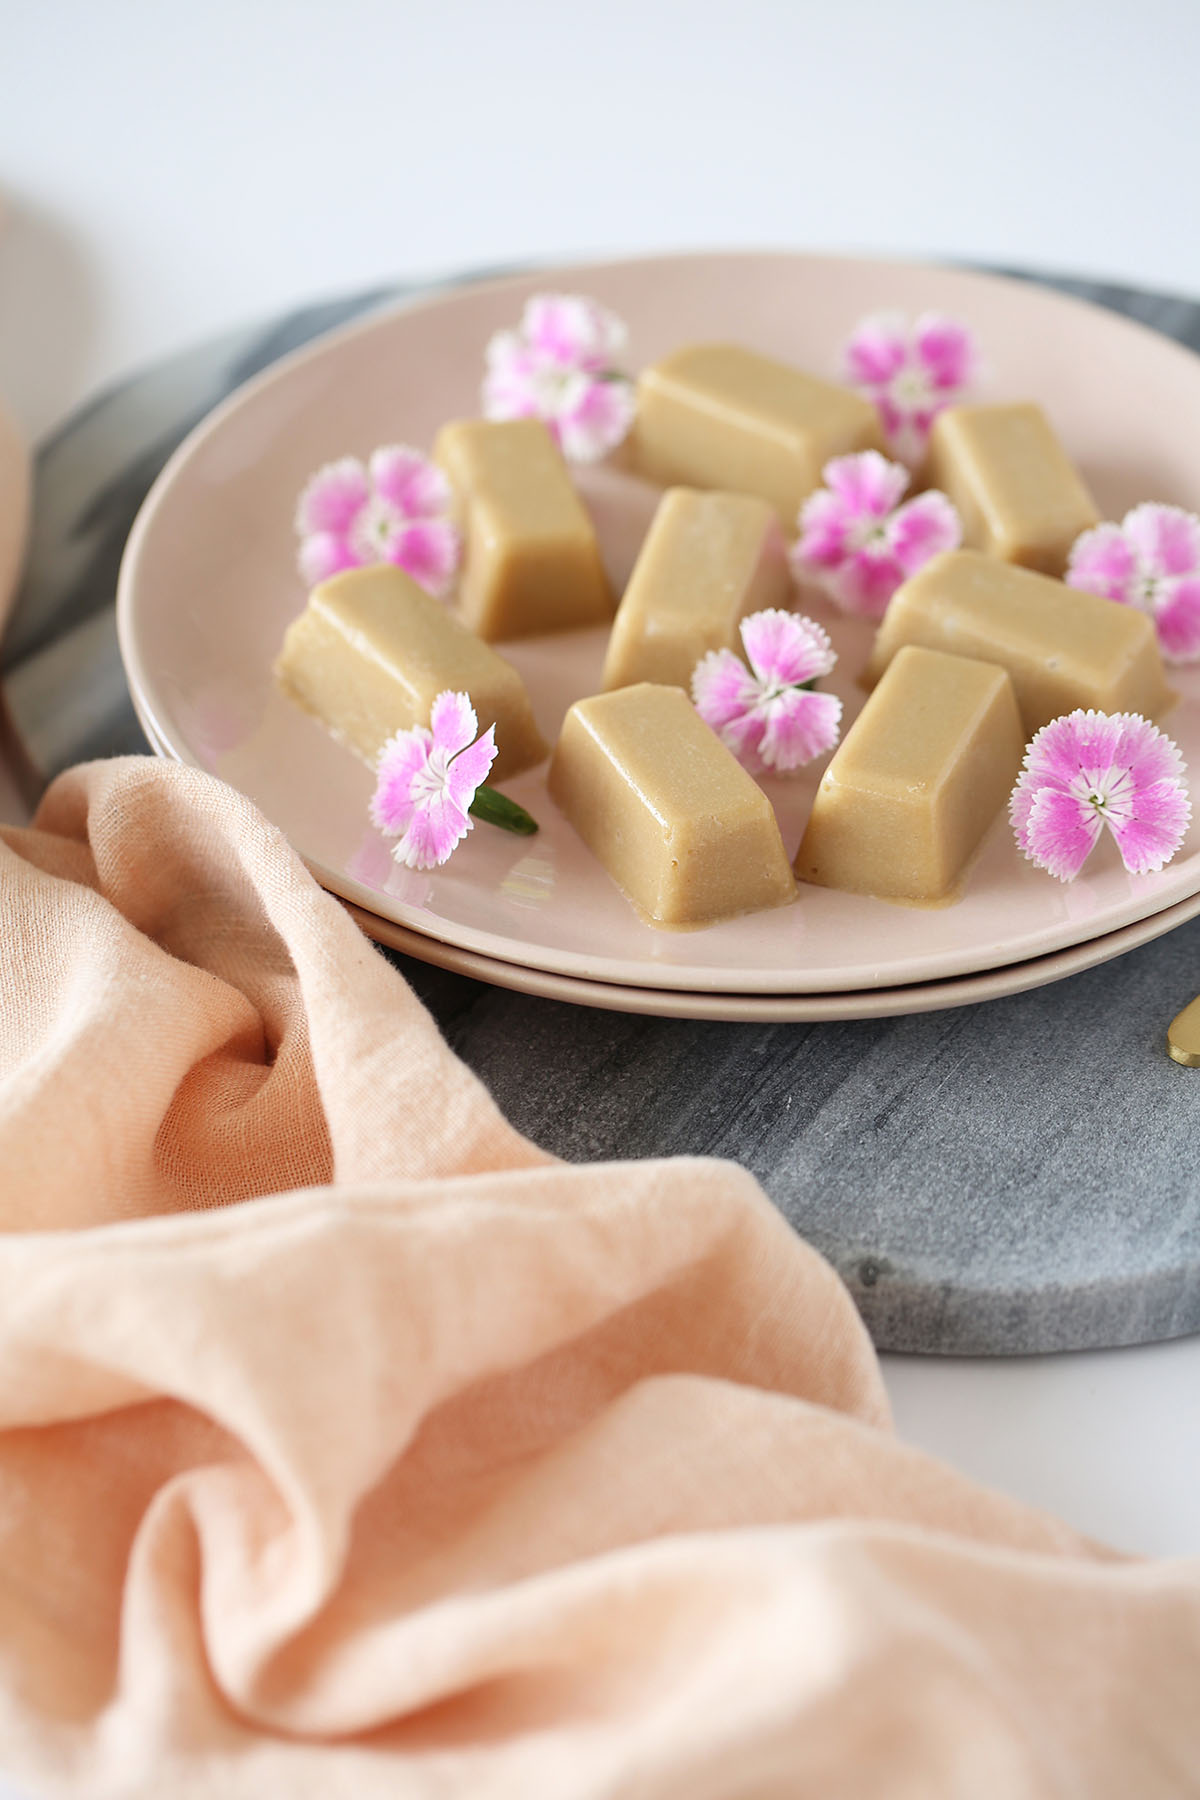 This delicious healthy fudge is melt in your mouth good, with 5 simple ingredients and no blender required. Vegan, dairy free & refined sugar free.